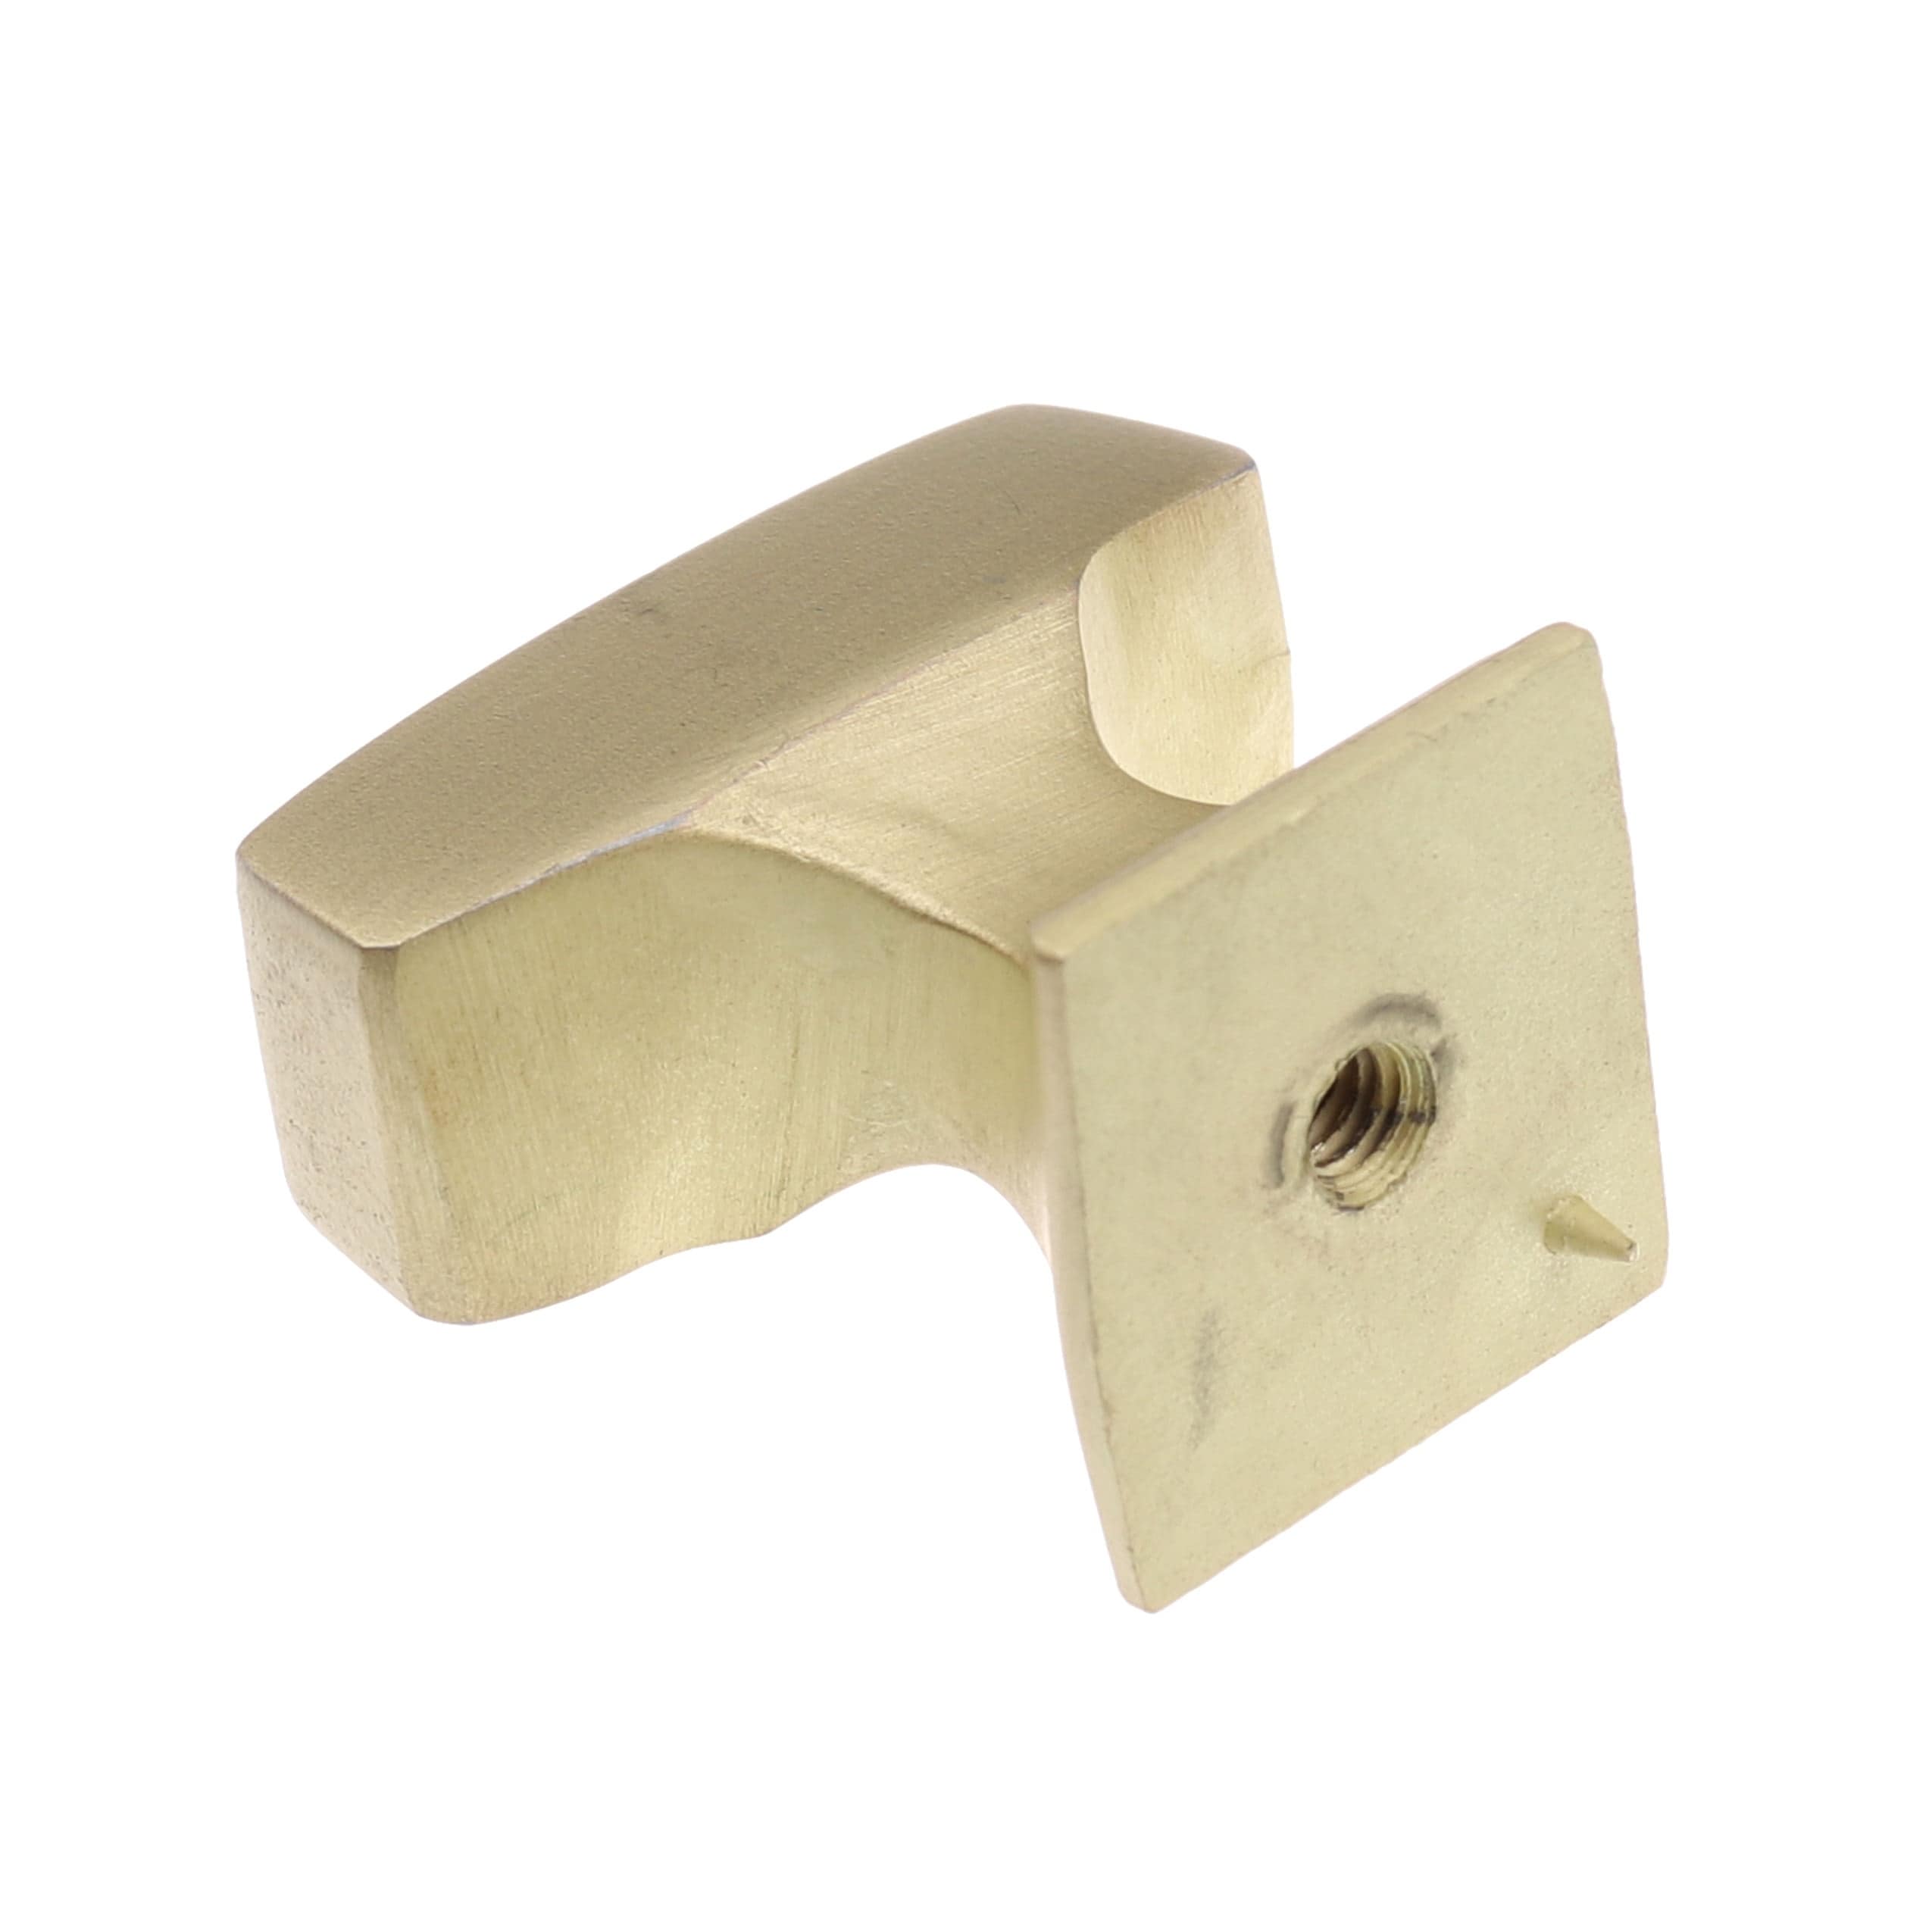 GlideRite 1-1/8 in. Transition Style Rectangle Cabinet Knob, Satin Gold, Pack of 25 - image 5 of 5